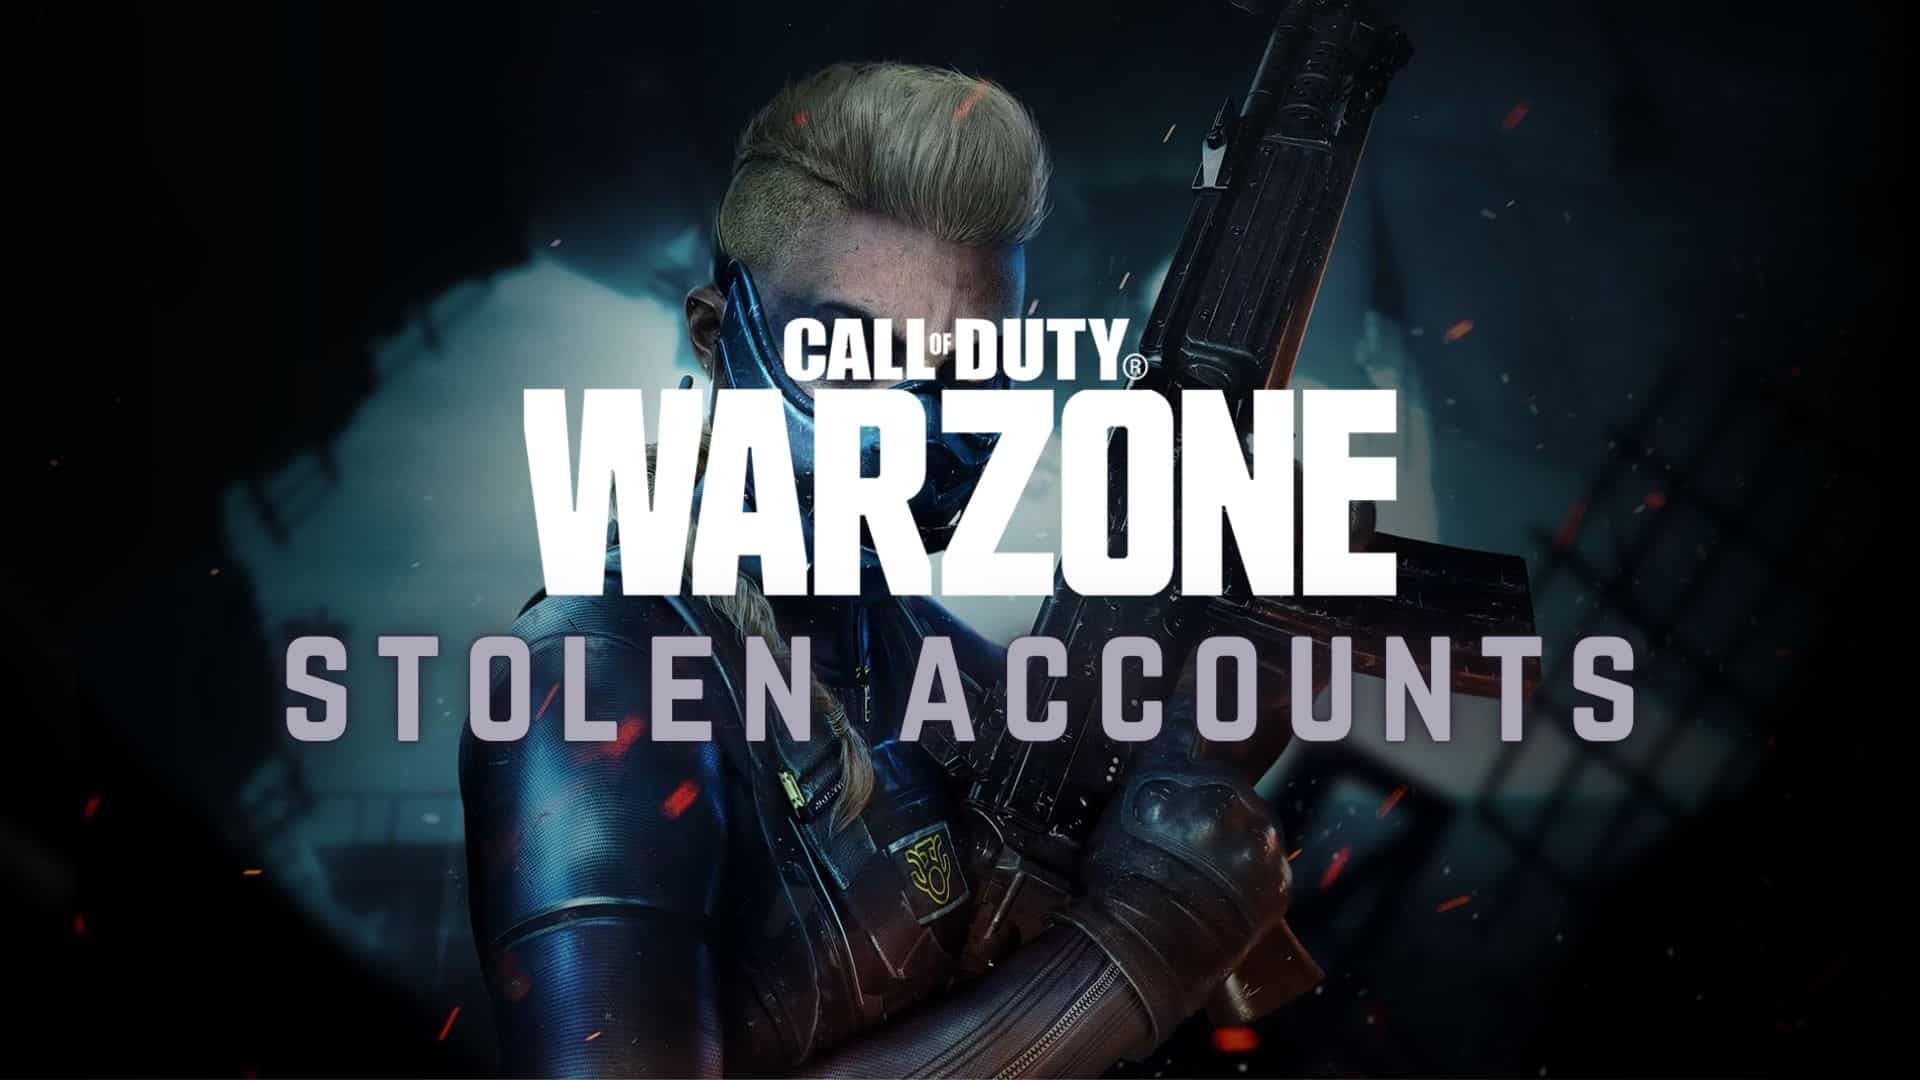 Keeping your Activision Account Secure